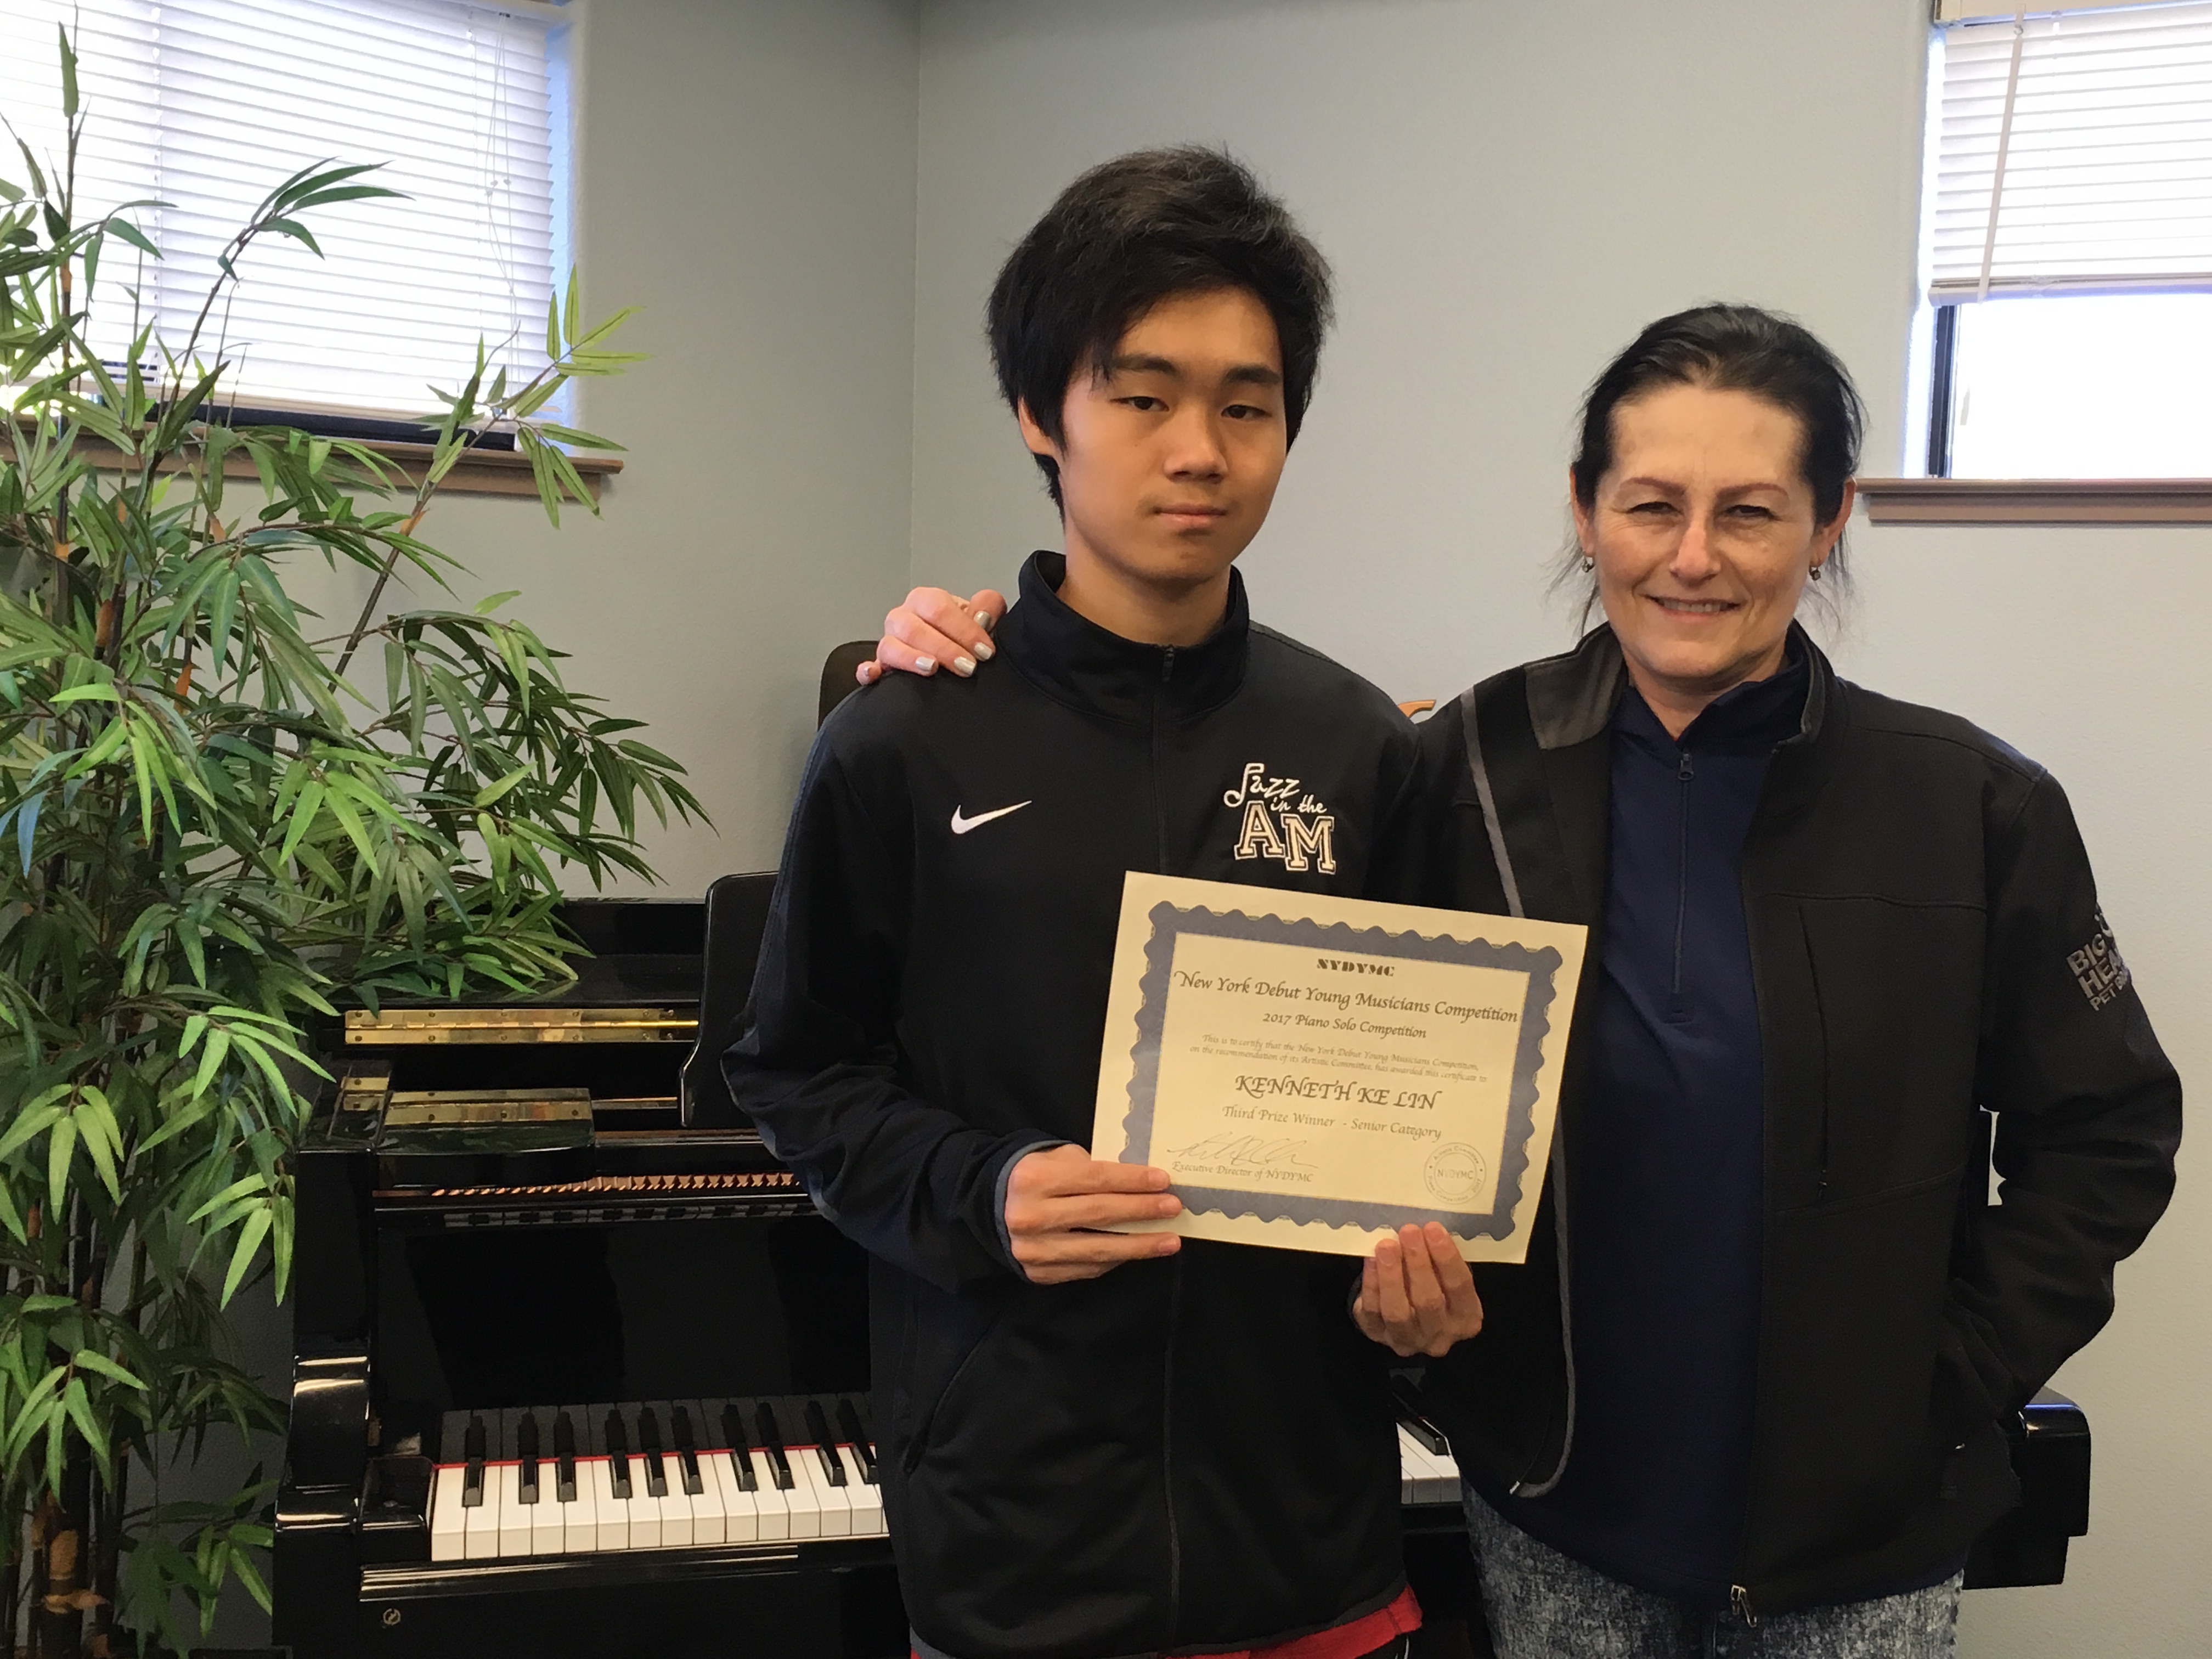 Kenneth Ke Lin Wins Third Place at the New York Debut Young Musicians Competition - Piano Solo.  Class - Anna Turkova